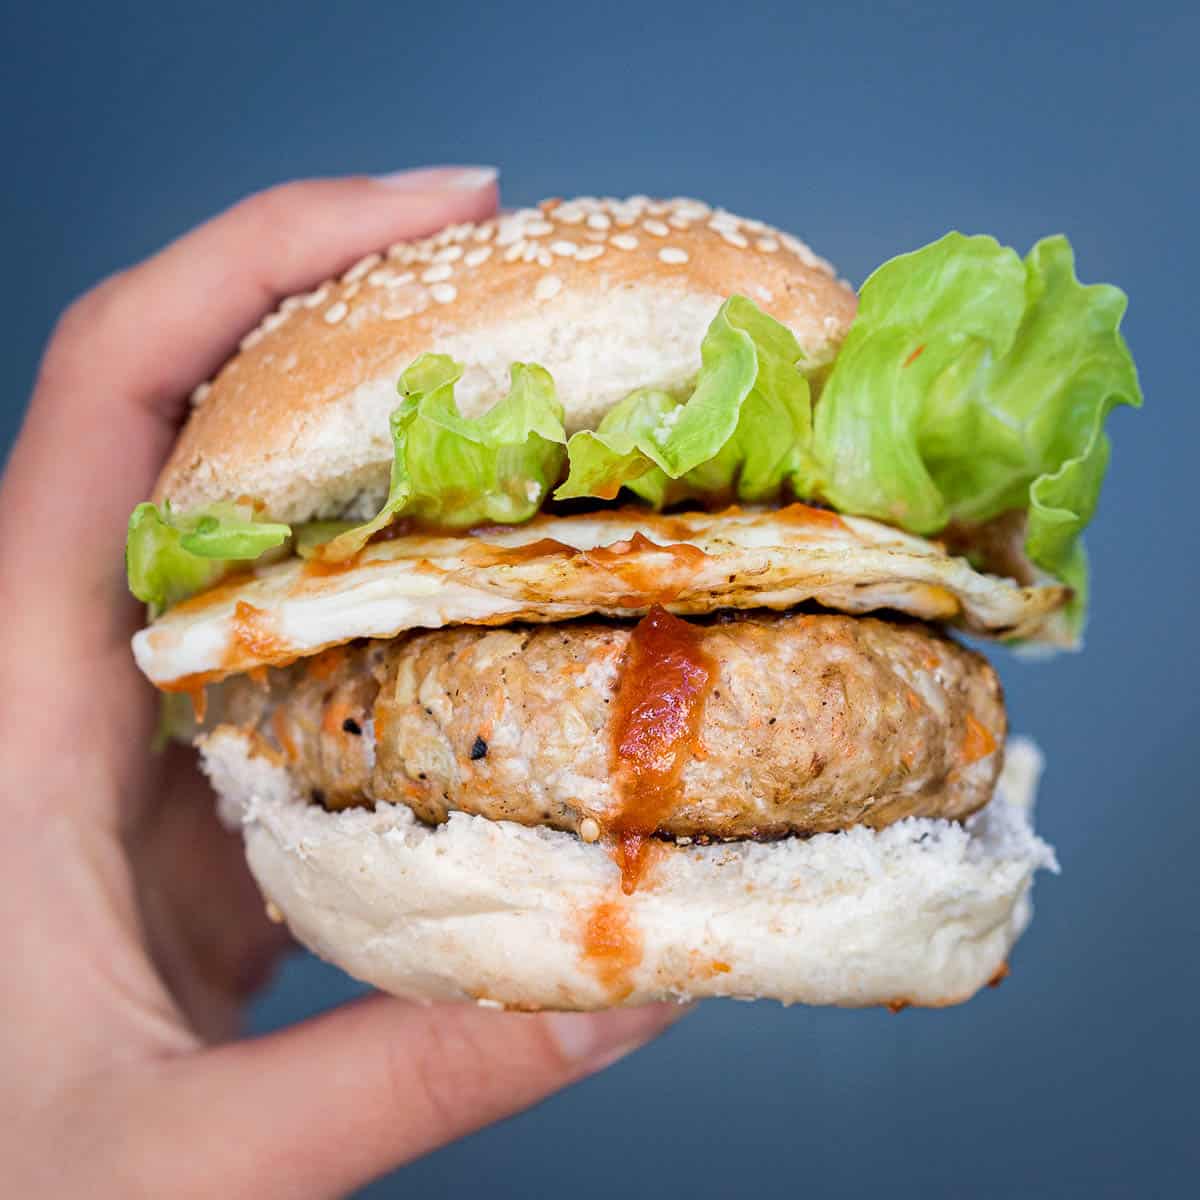 Hand holding a small pork burger with egg and lettuce on a sesame seed bun.